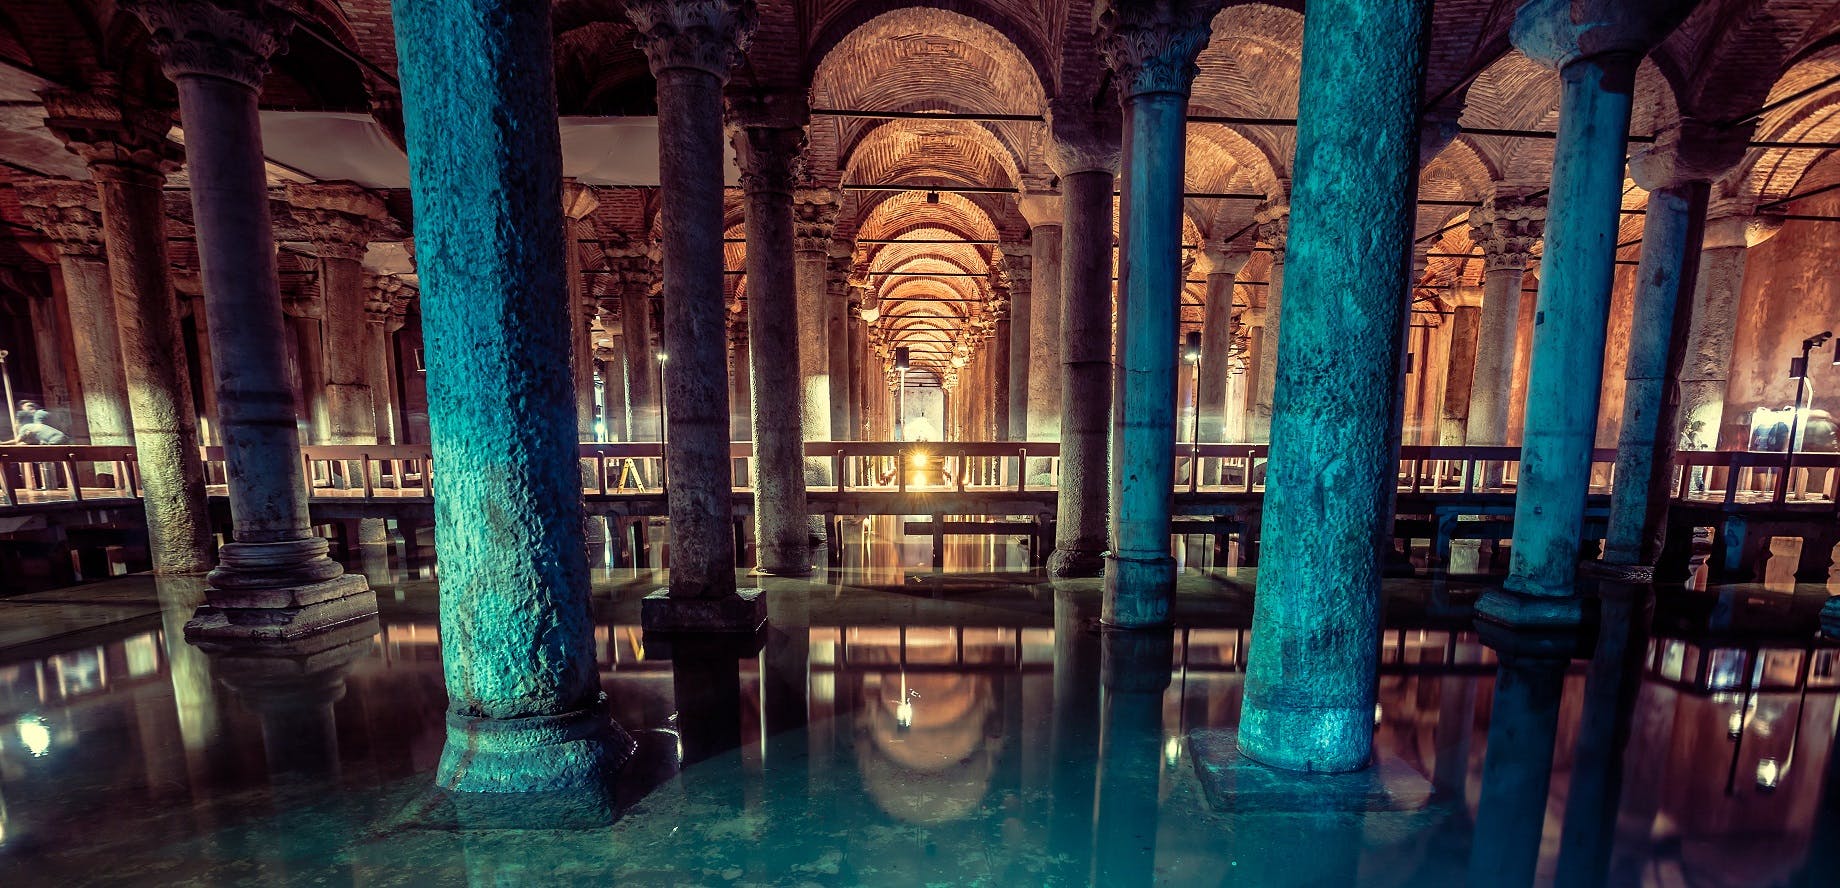 Skip the line ticket and guided tour to the Basilica Cistern in Istanbul